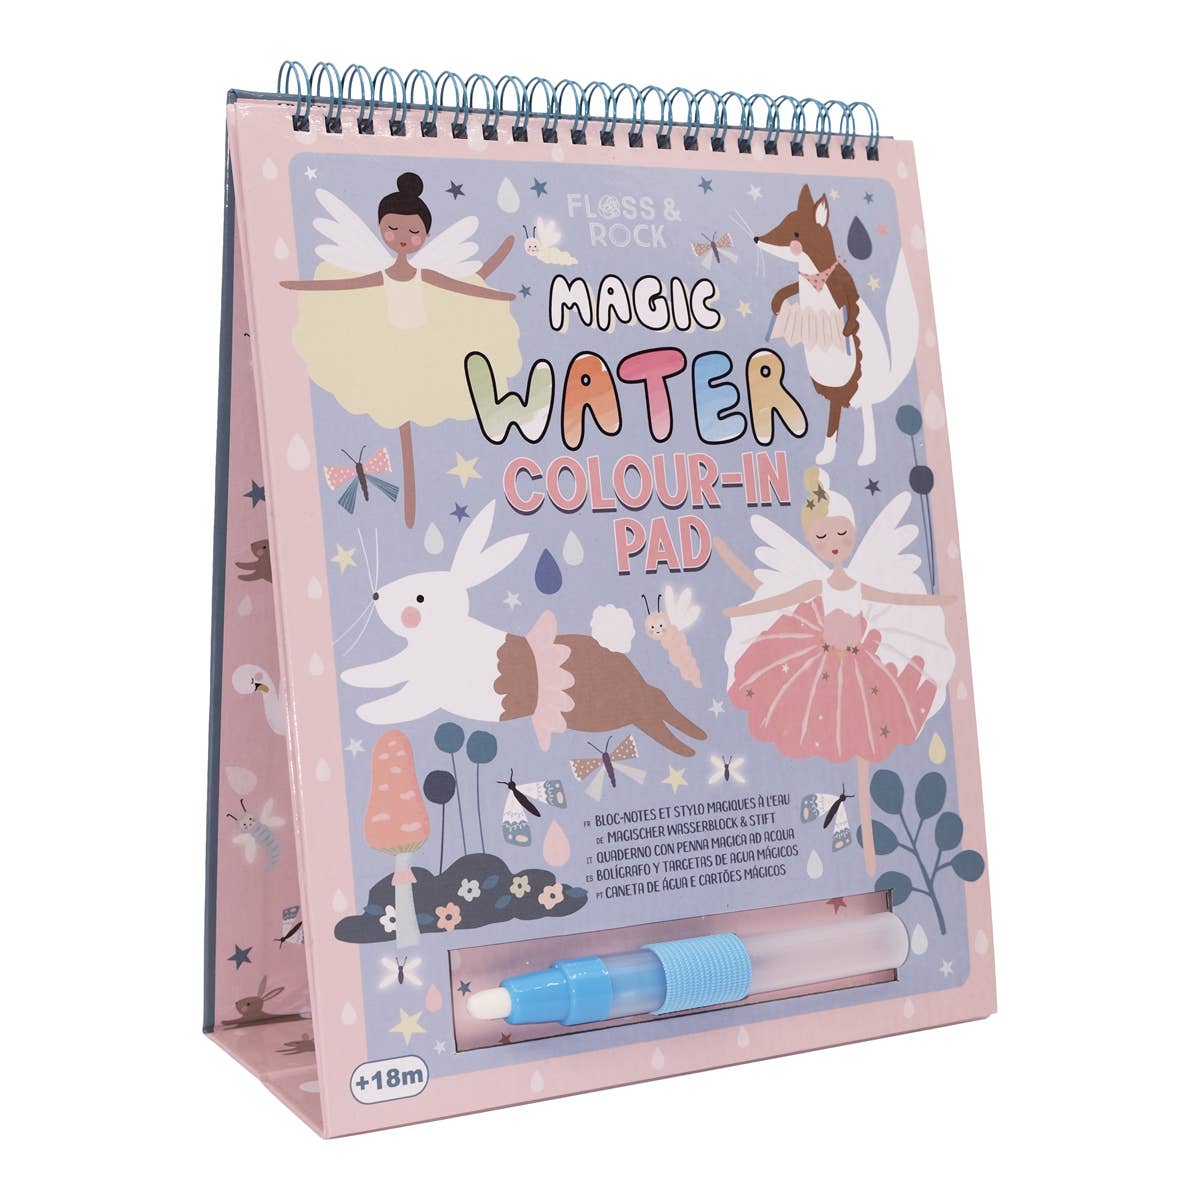 Floss and Rock - Magic Colour Changing Watercard Easel and Pen - Enchanted - Mumzie's Children